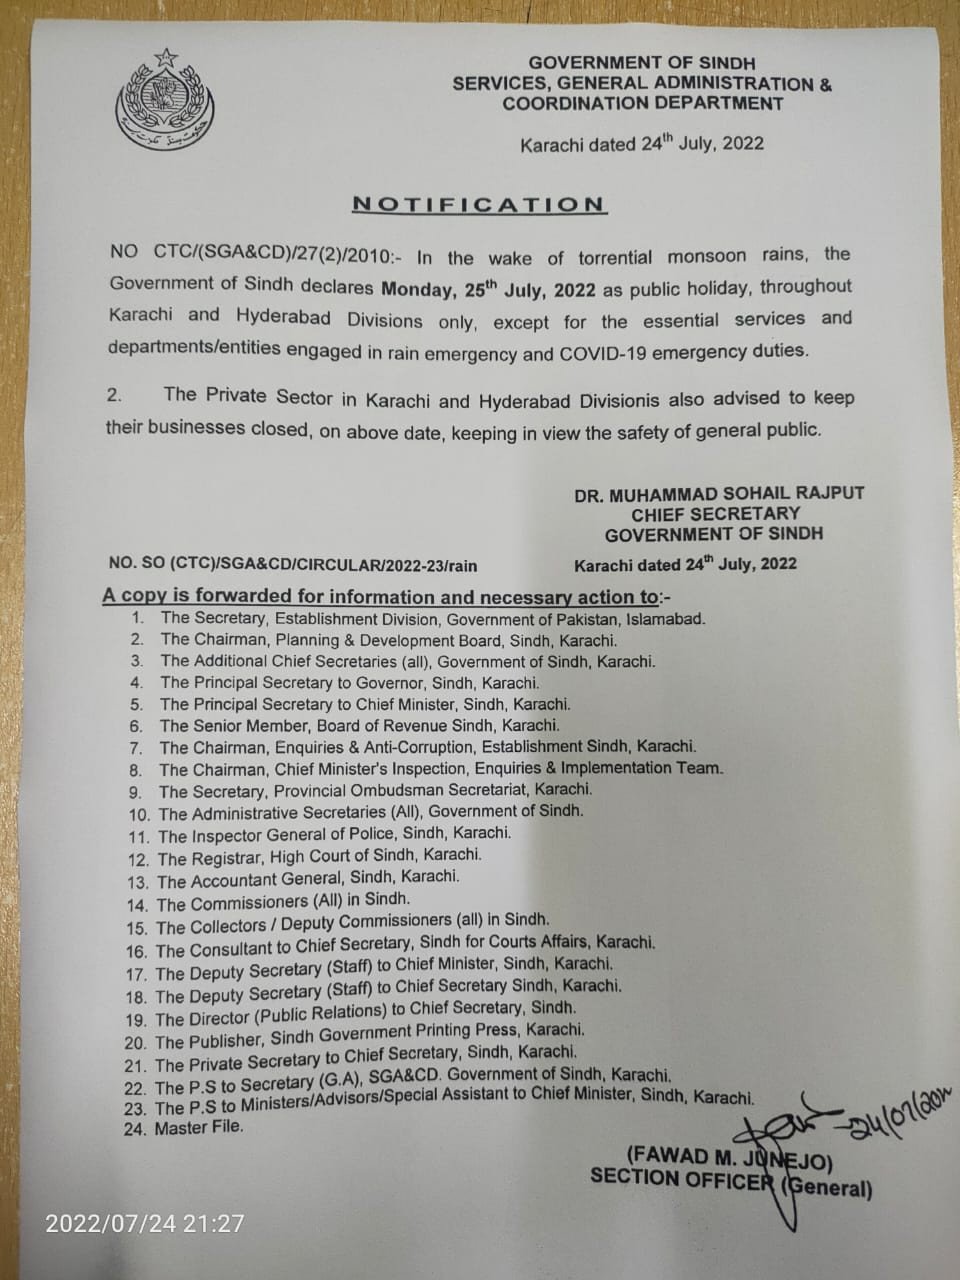 Public Holiday in Karachi and Hyderabad on 25 July